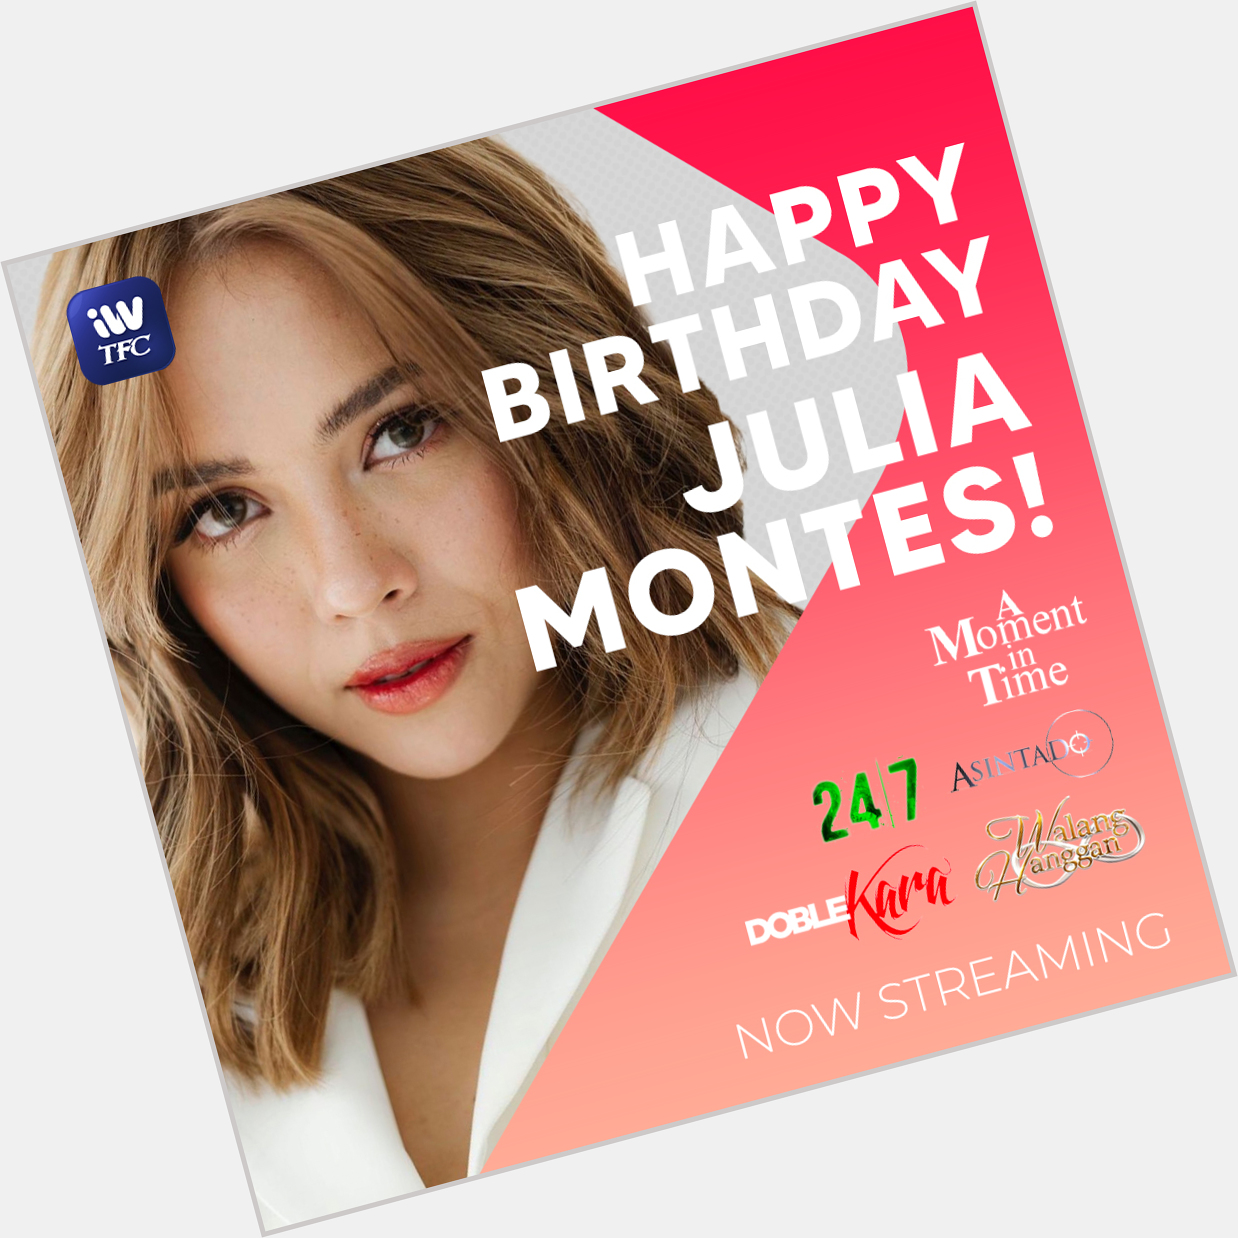 Happy birthday, Julia Montes!   Celebrate this special day by watching her shows and movies on iWantTFC! 